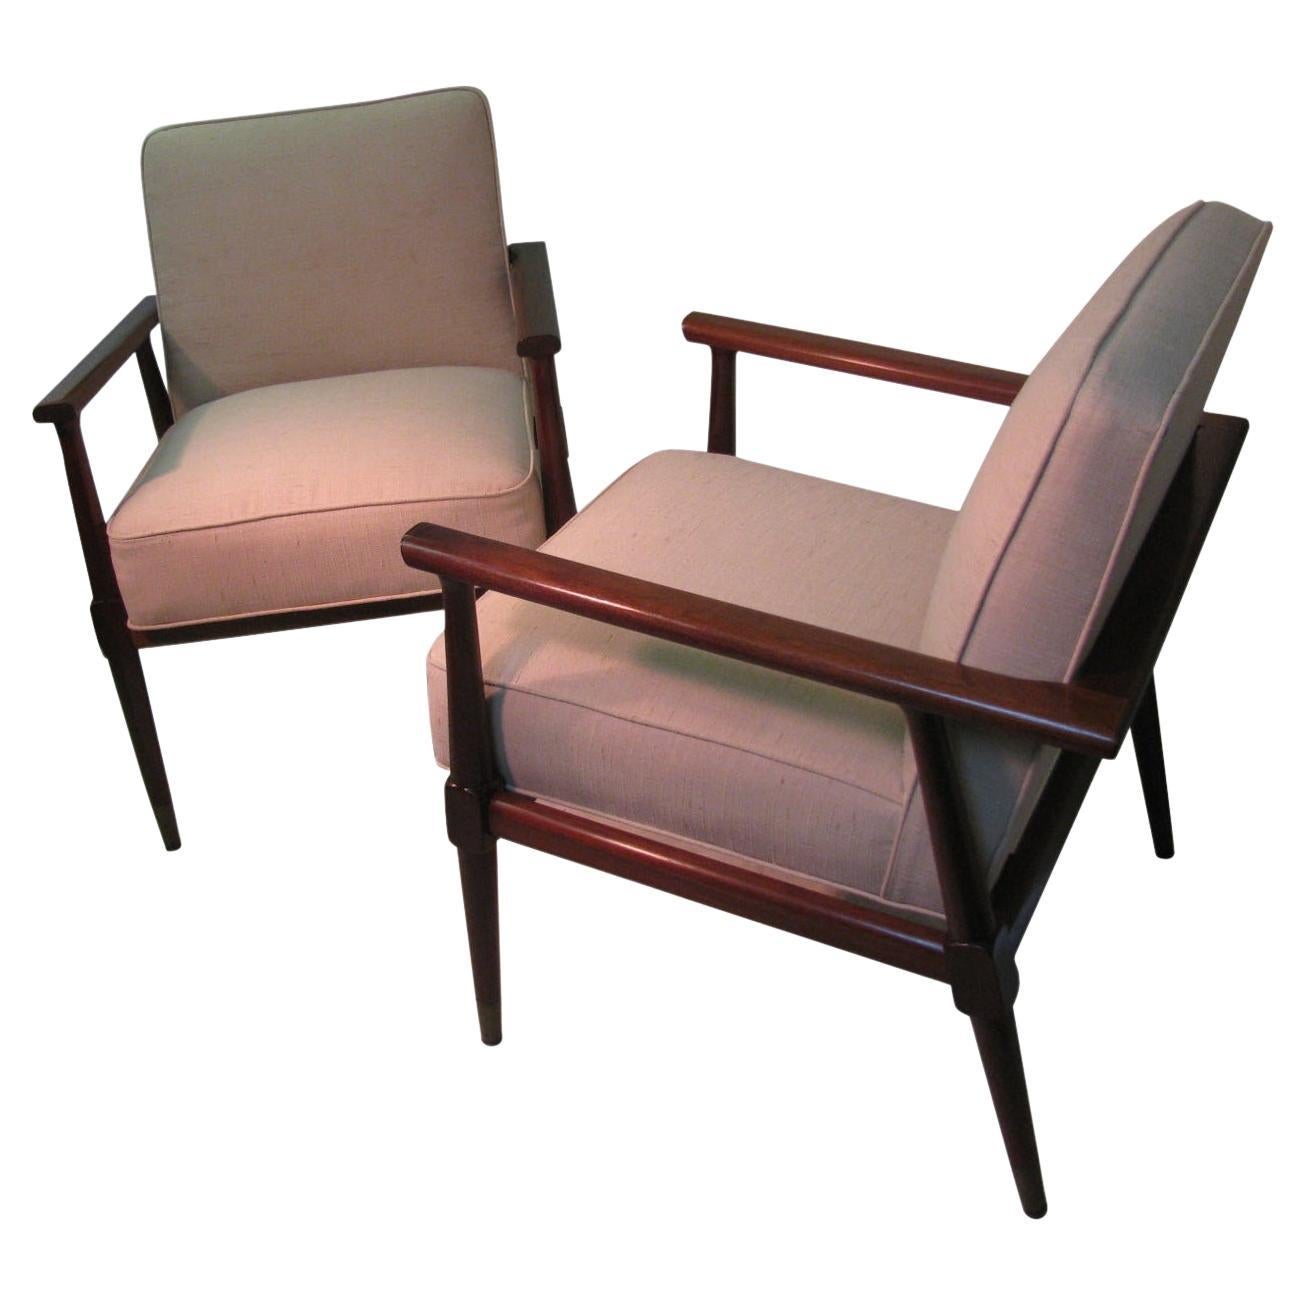 Pair of Mid-Century Modern Black Walnut Lounge Armchairs, 1957 For Sale